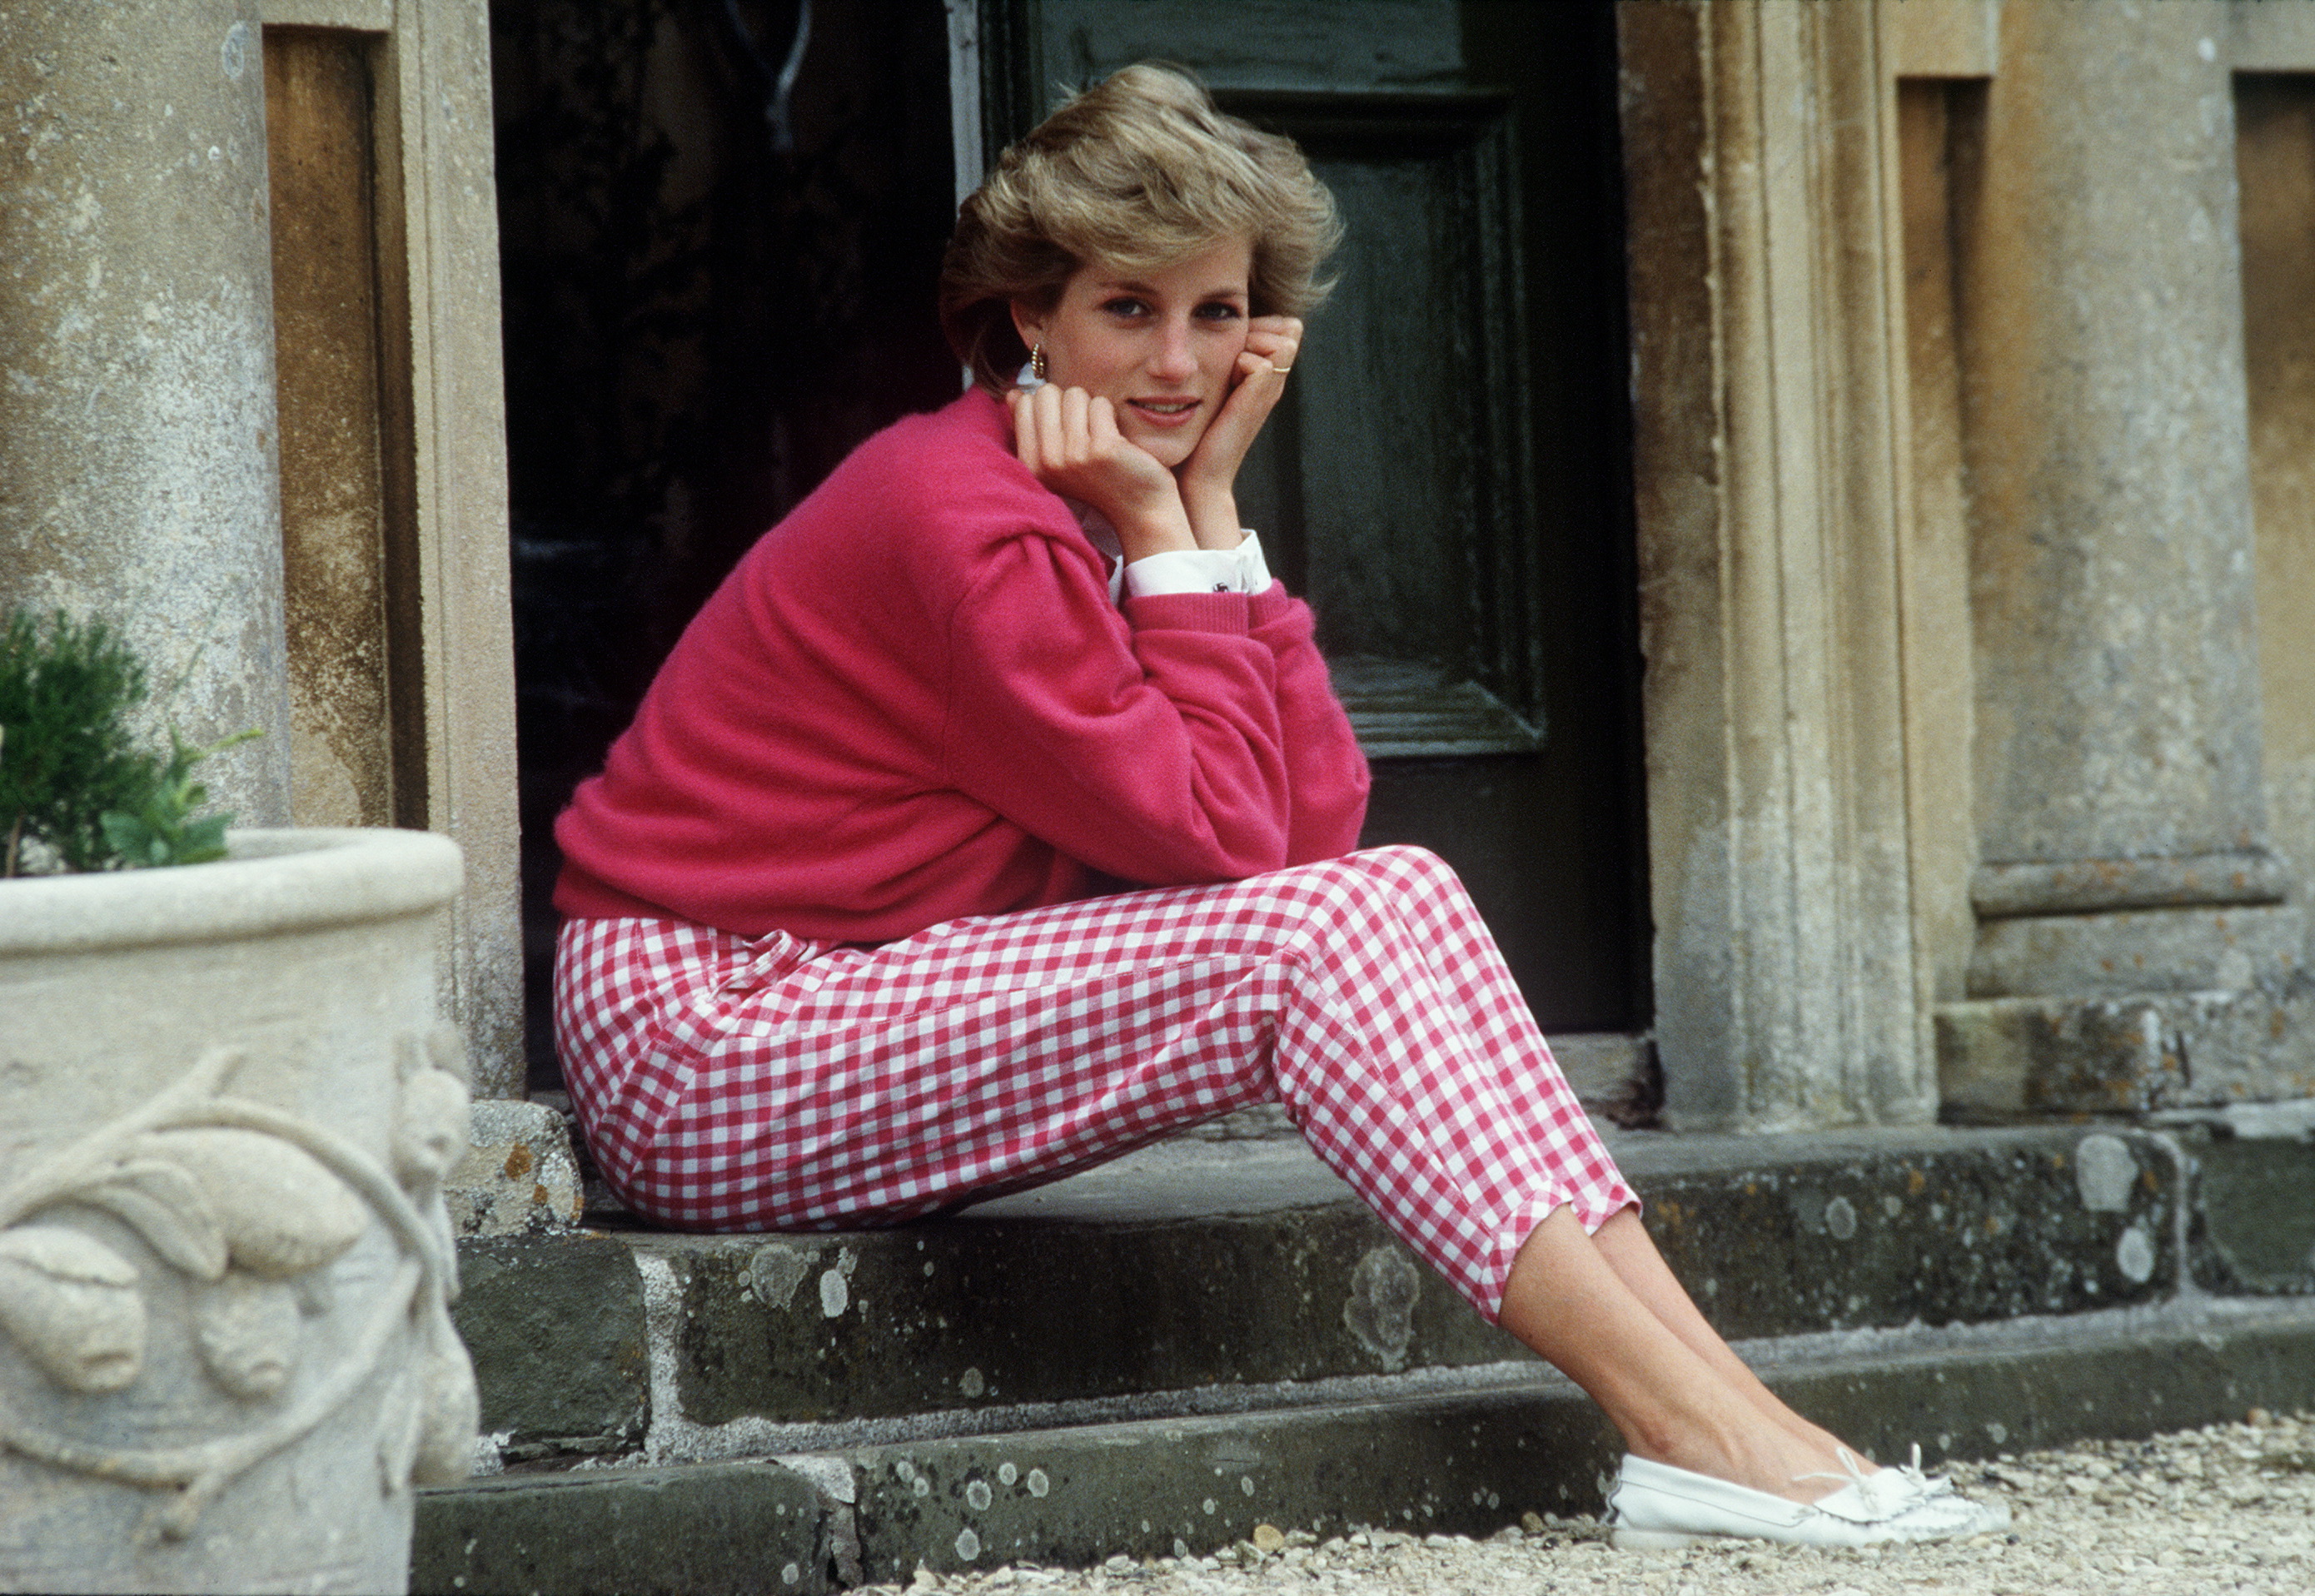 Why Was Princess Diana Still the Princess of Wales After Her Divorce From Prince Charles?